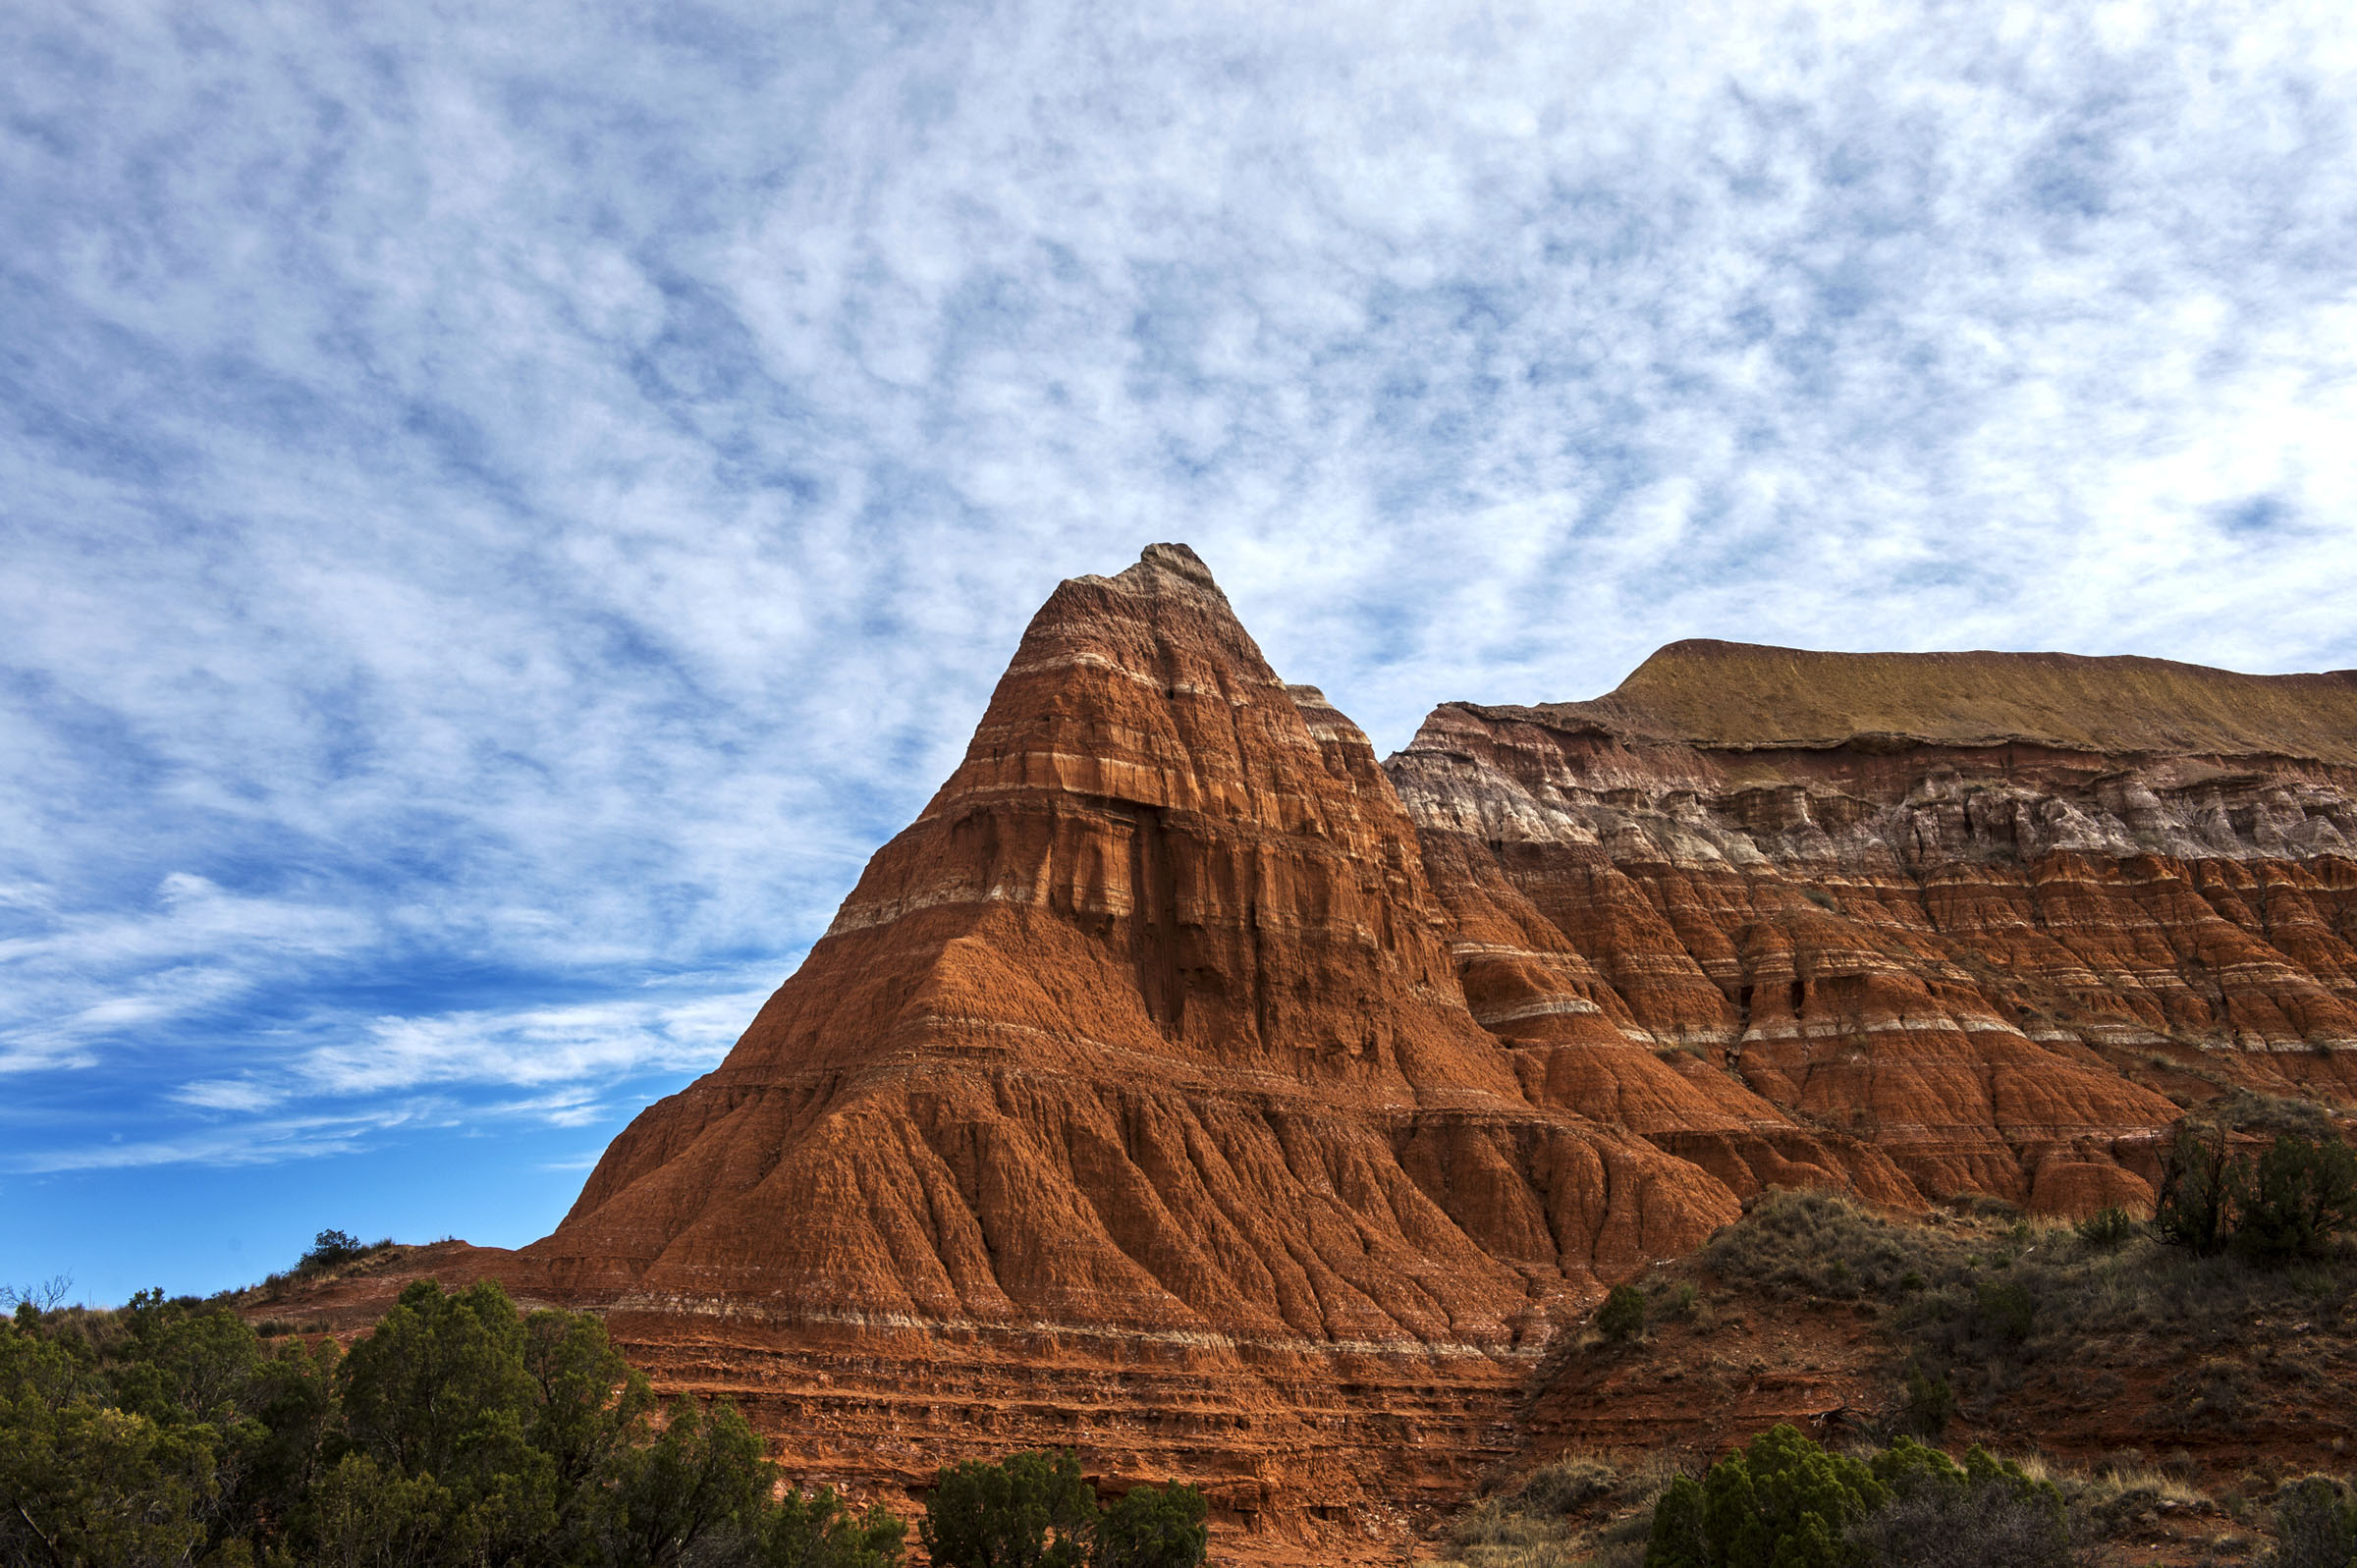 A large red rock outcropping against a semi-cloudy blue sky